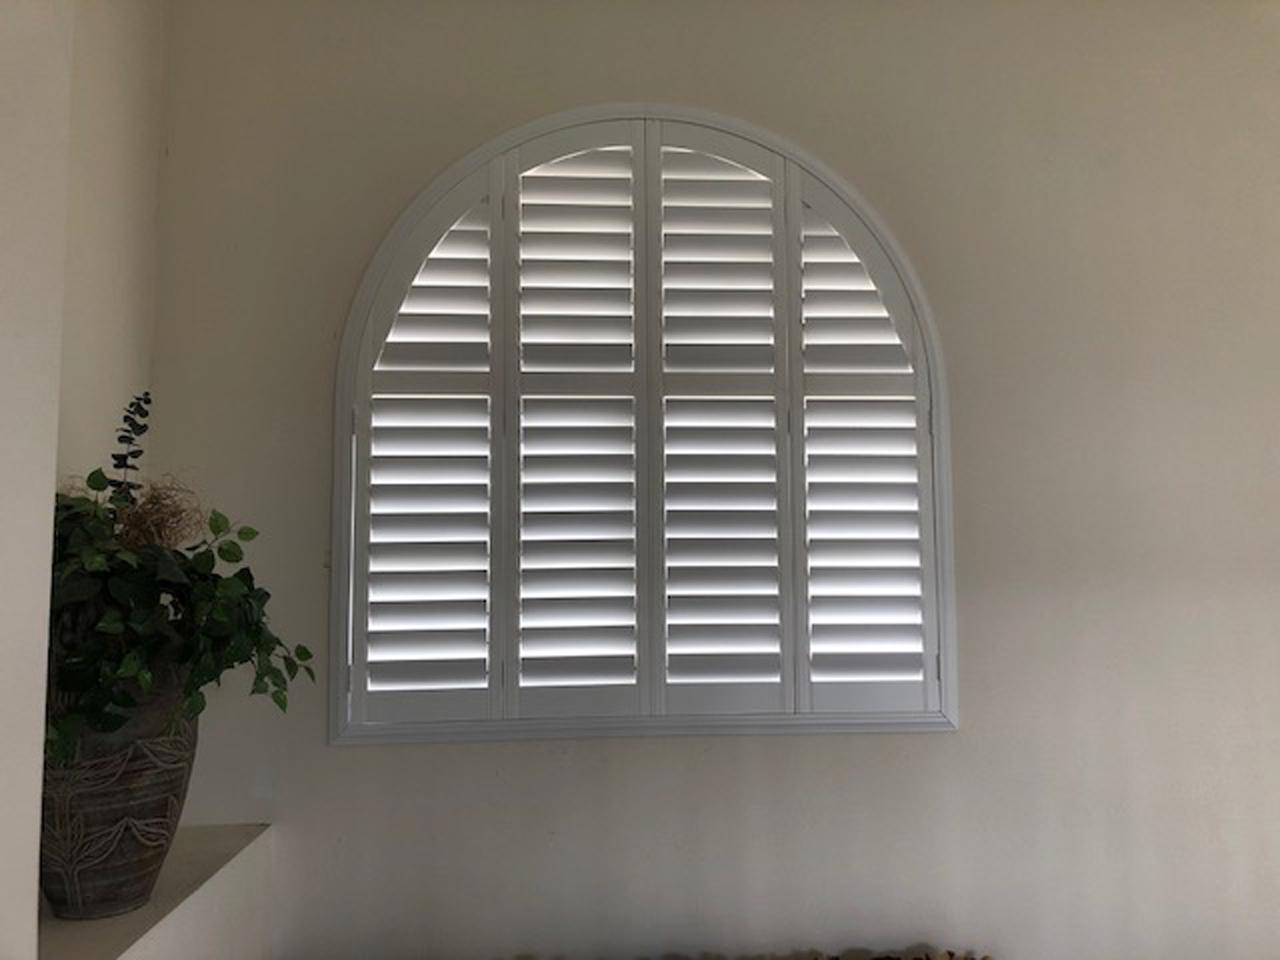 Arched window with shutters